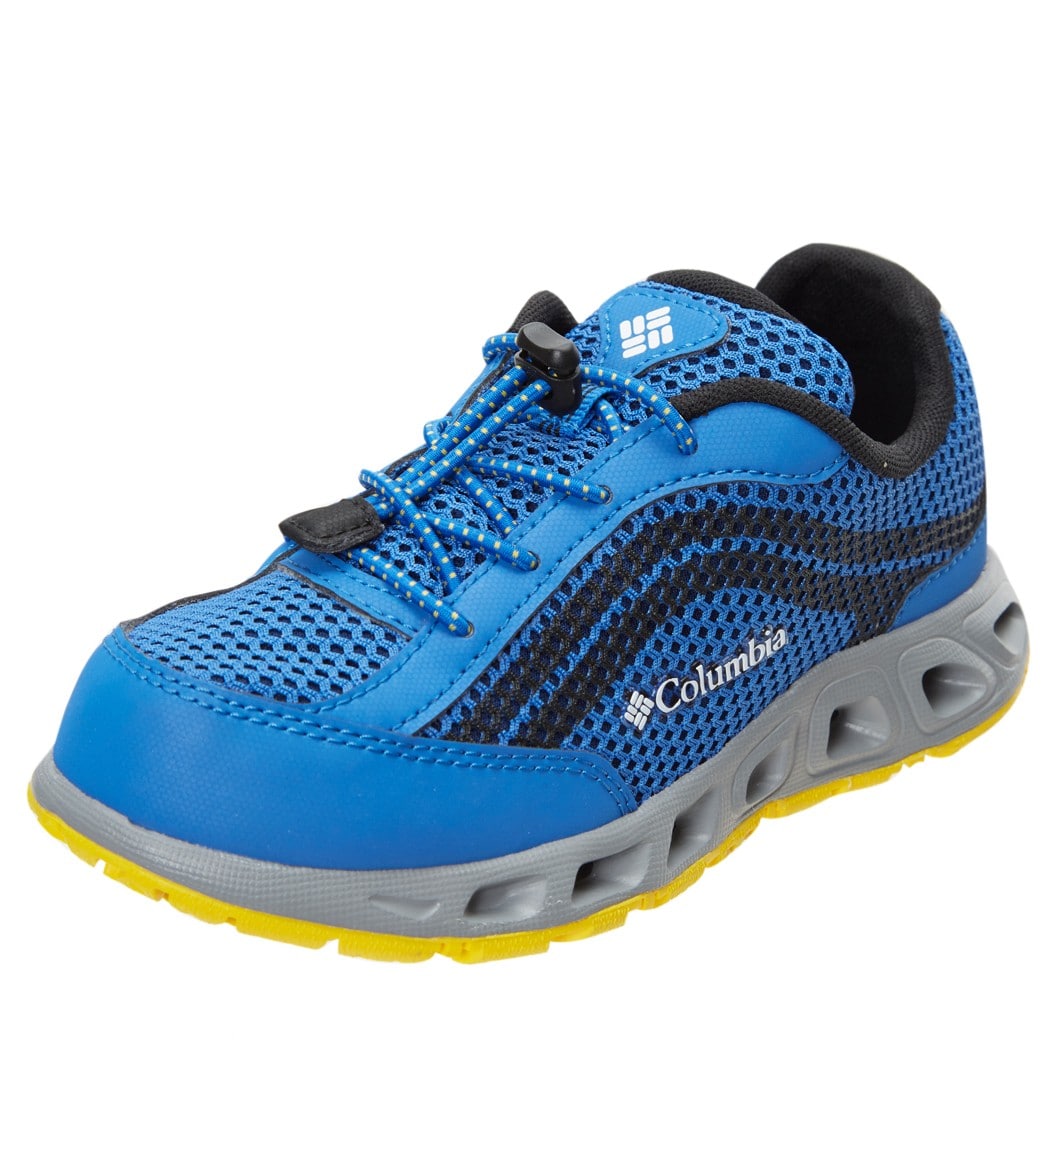 Columbia Youth Drainmaker Iv Water Shoe - Stormy Blue Deep Yellow 6 Blue - Swimoutlet.com